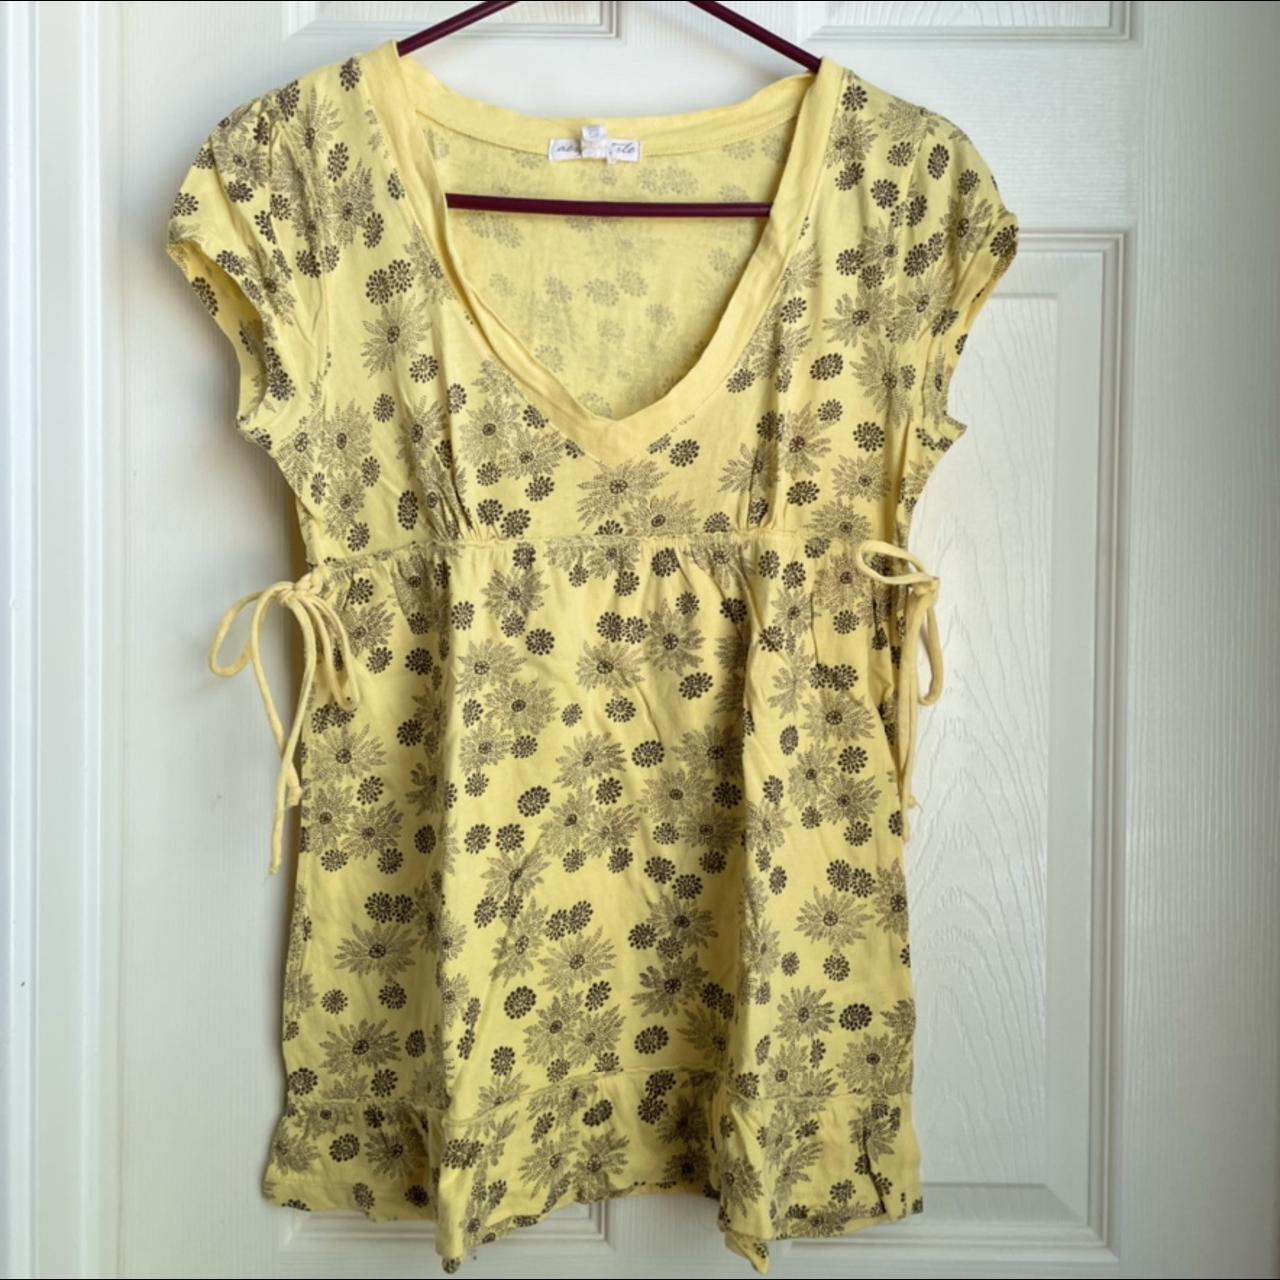 Y2K yellow babydoll top Details include an adorable... - Depop